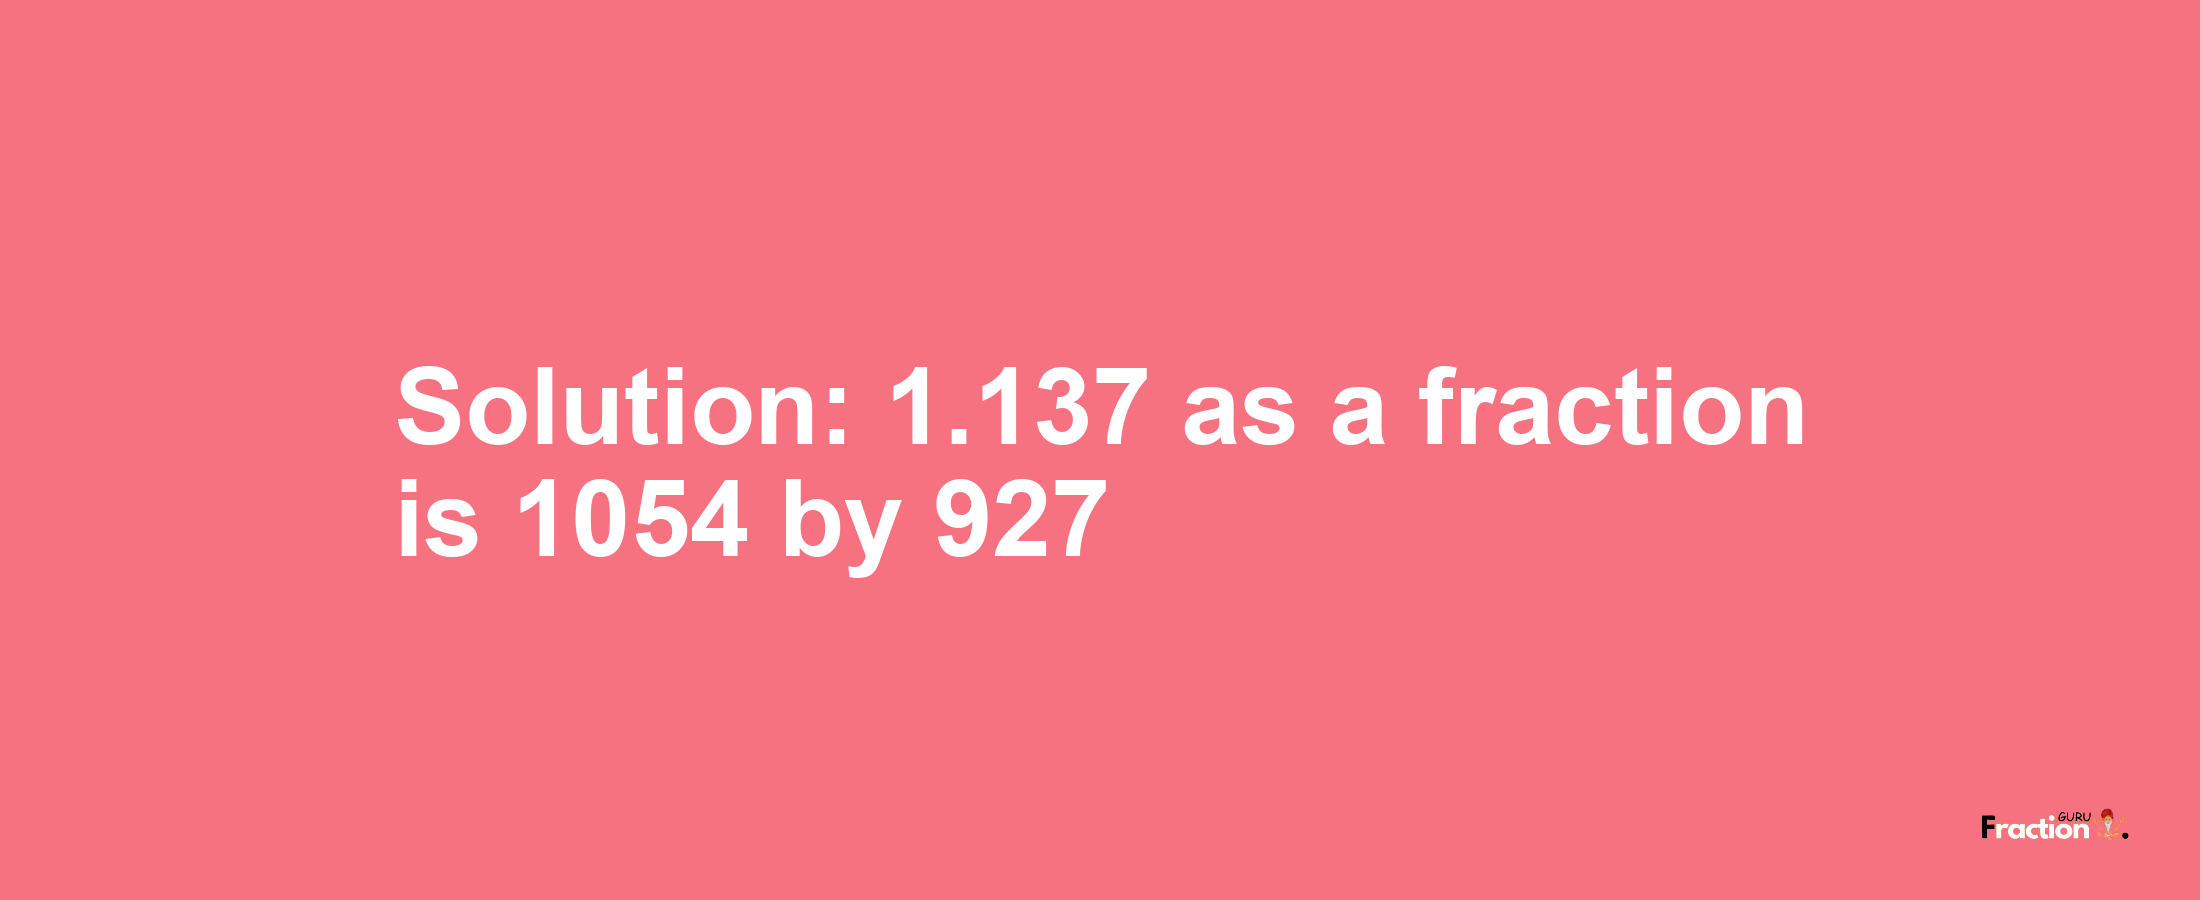 Solution:1.137 as a fraction is 1054/927